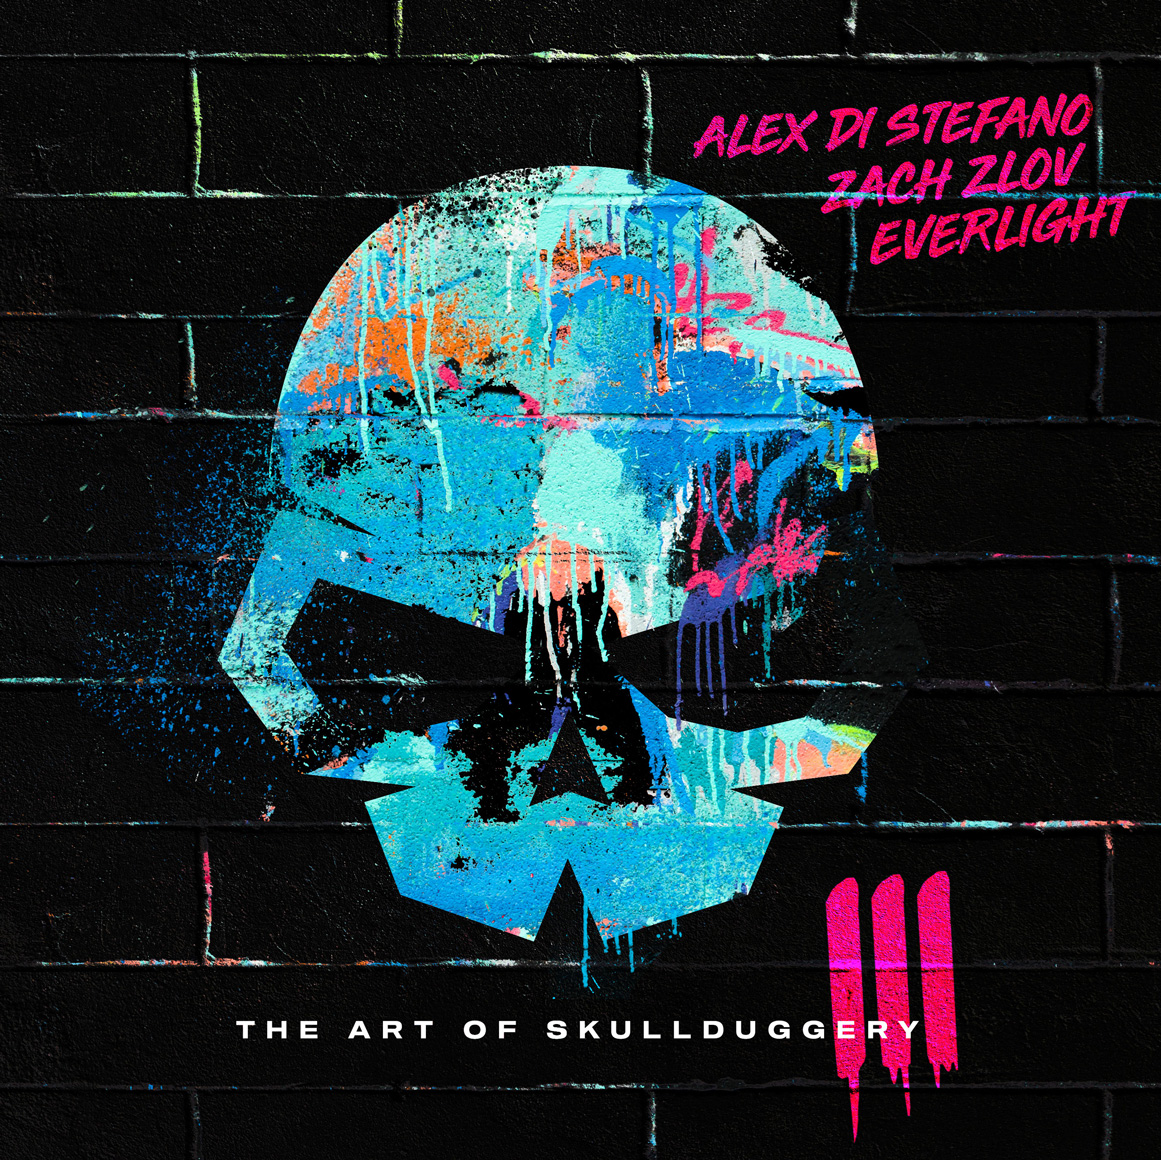 Various Artists presents The Art Of Skullduggery volume 3 mixed by Alex Di Stefano, Zach Zlov and Everlight on Black Hole Recordings